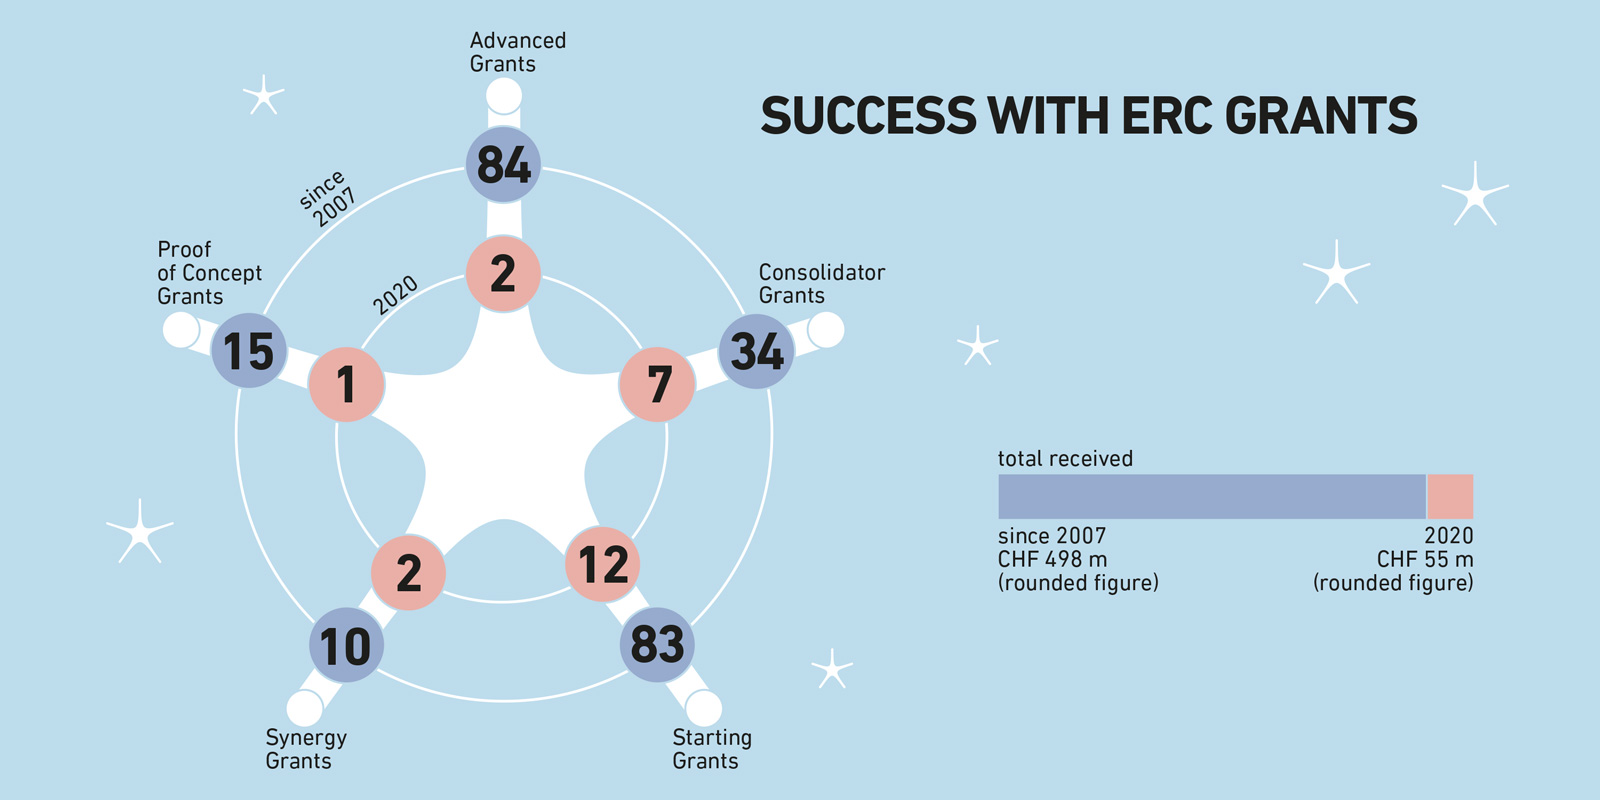 ETH's successes in ERC Grants since 2007